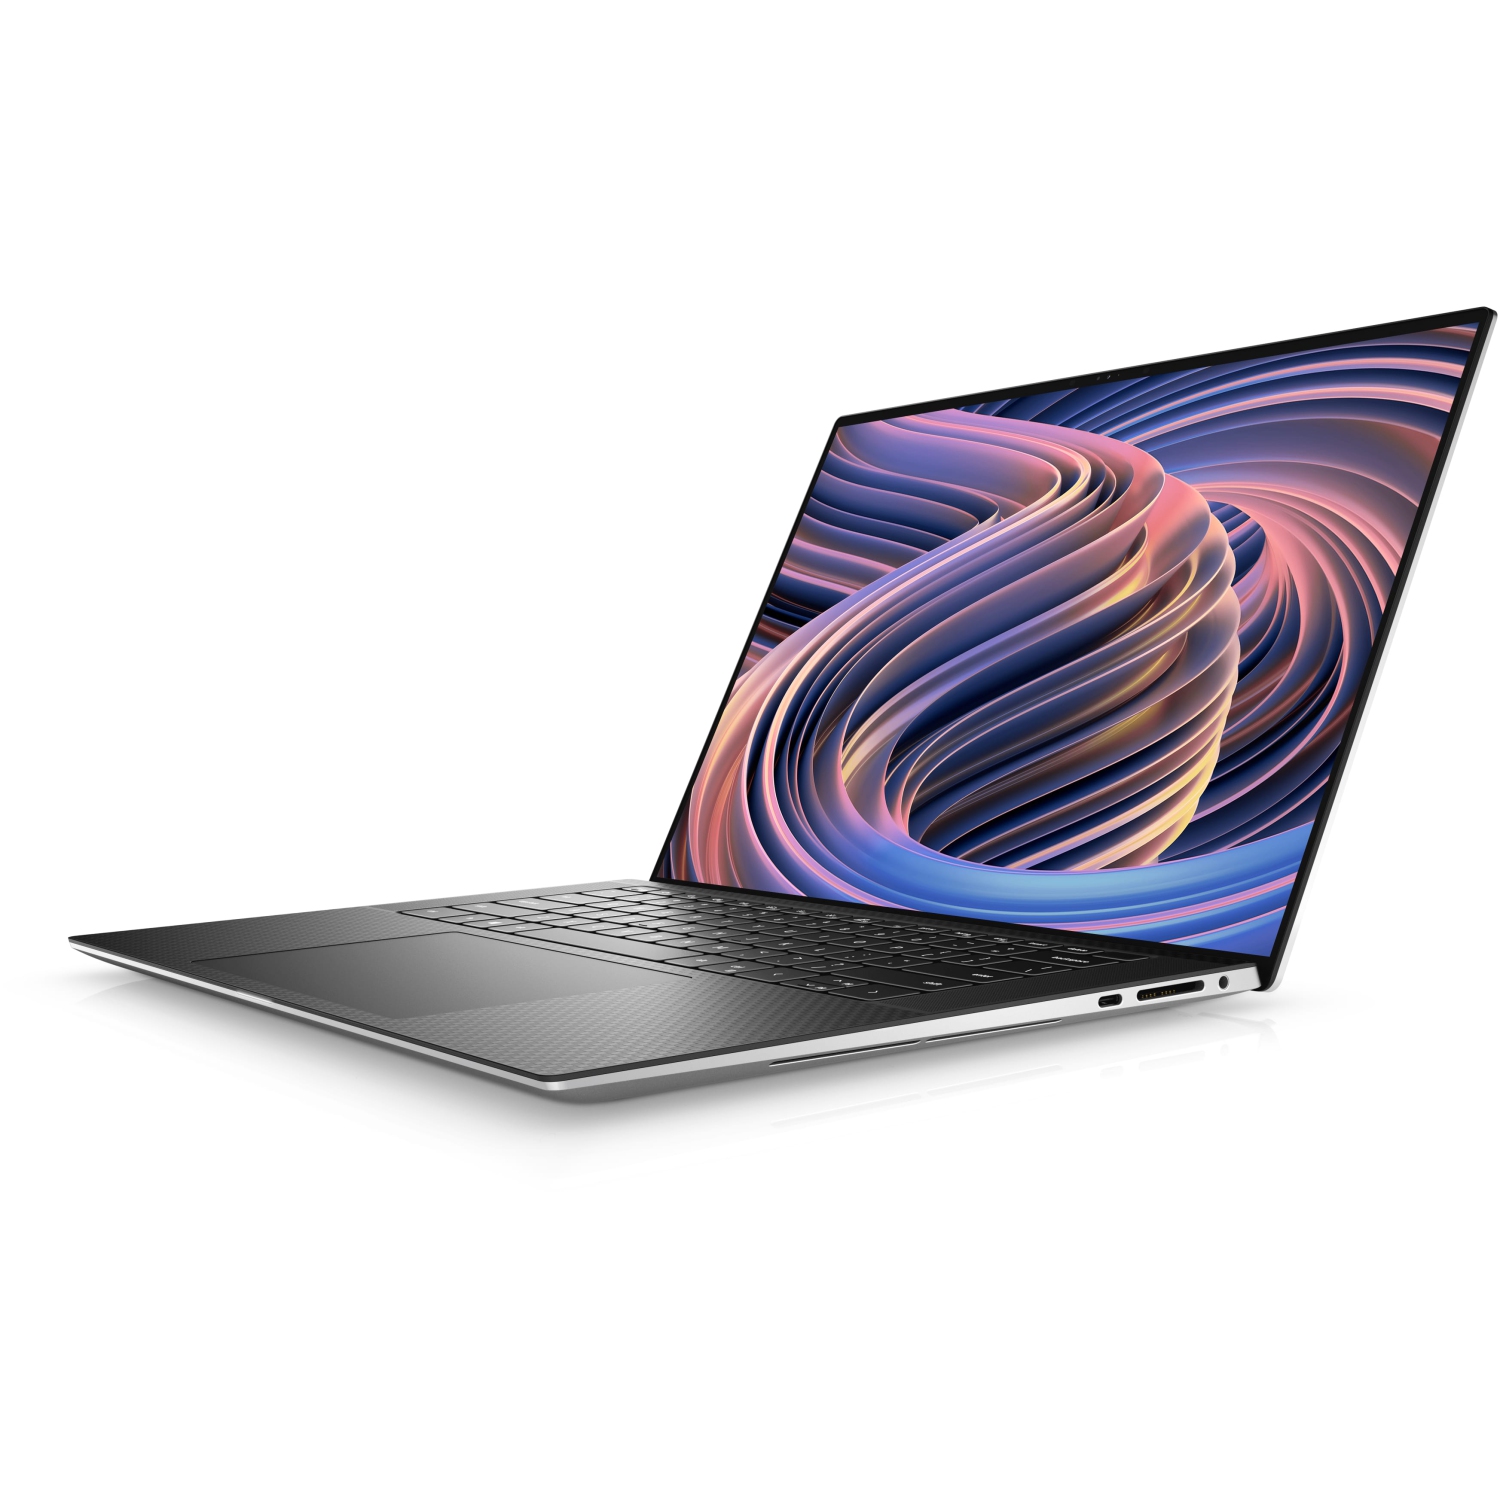 Refurbished (Excellent) – Dell XPS 9520 Laptop (2022) | 15.6" 4K Touch | Core i7 - 512GB SSD - 16GB RAM - RTX 3050 | 14 Cores @ 4.7 GHz - 12th Gen CPU